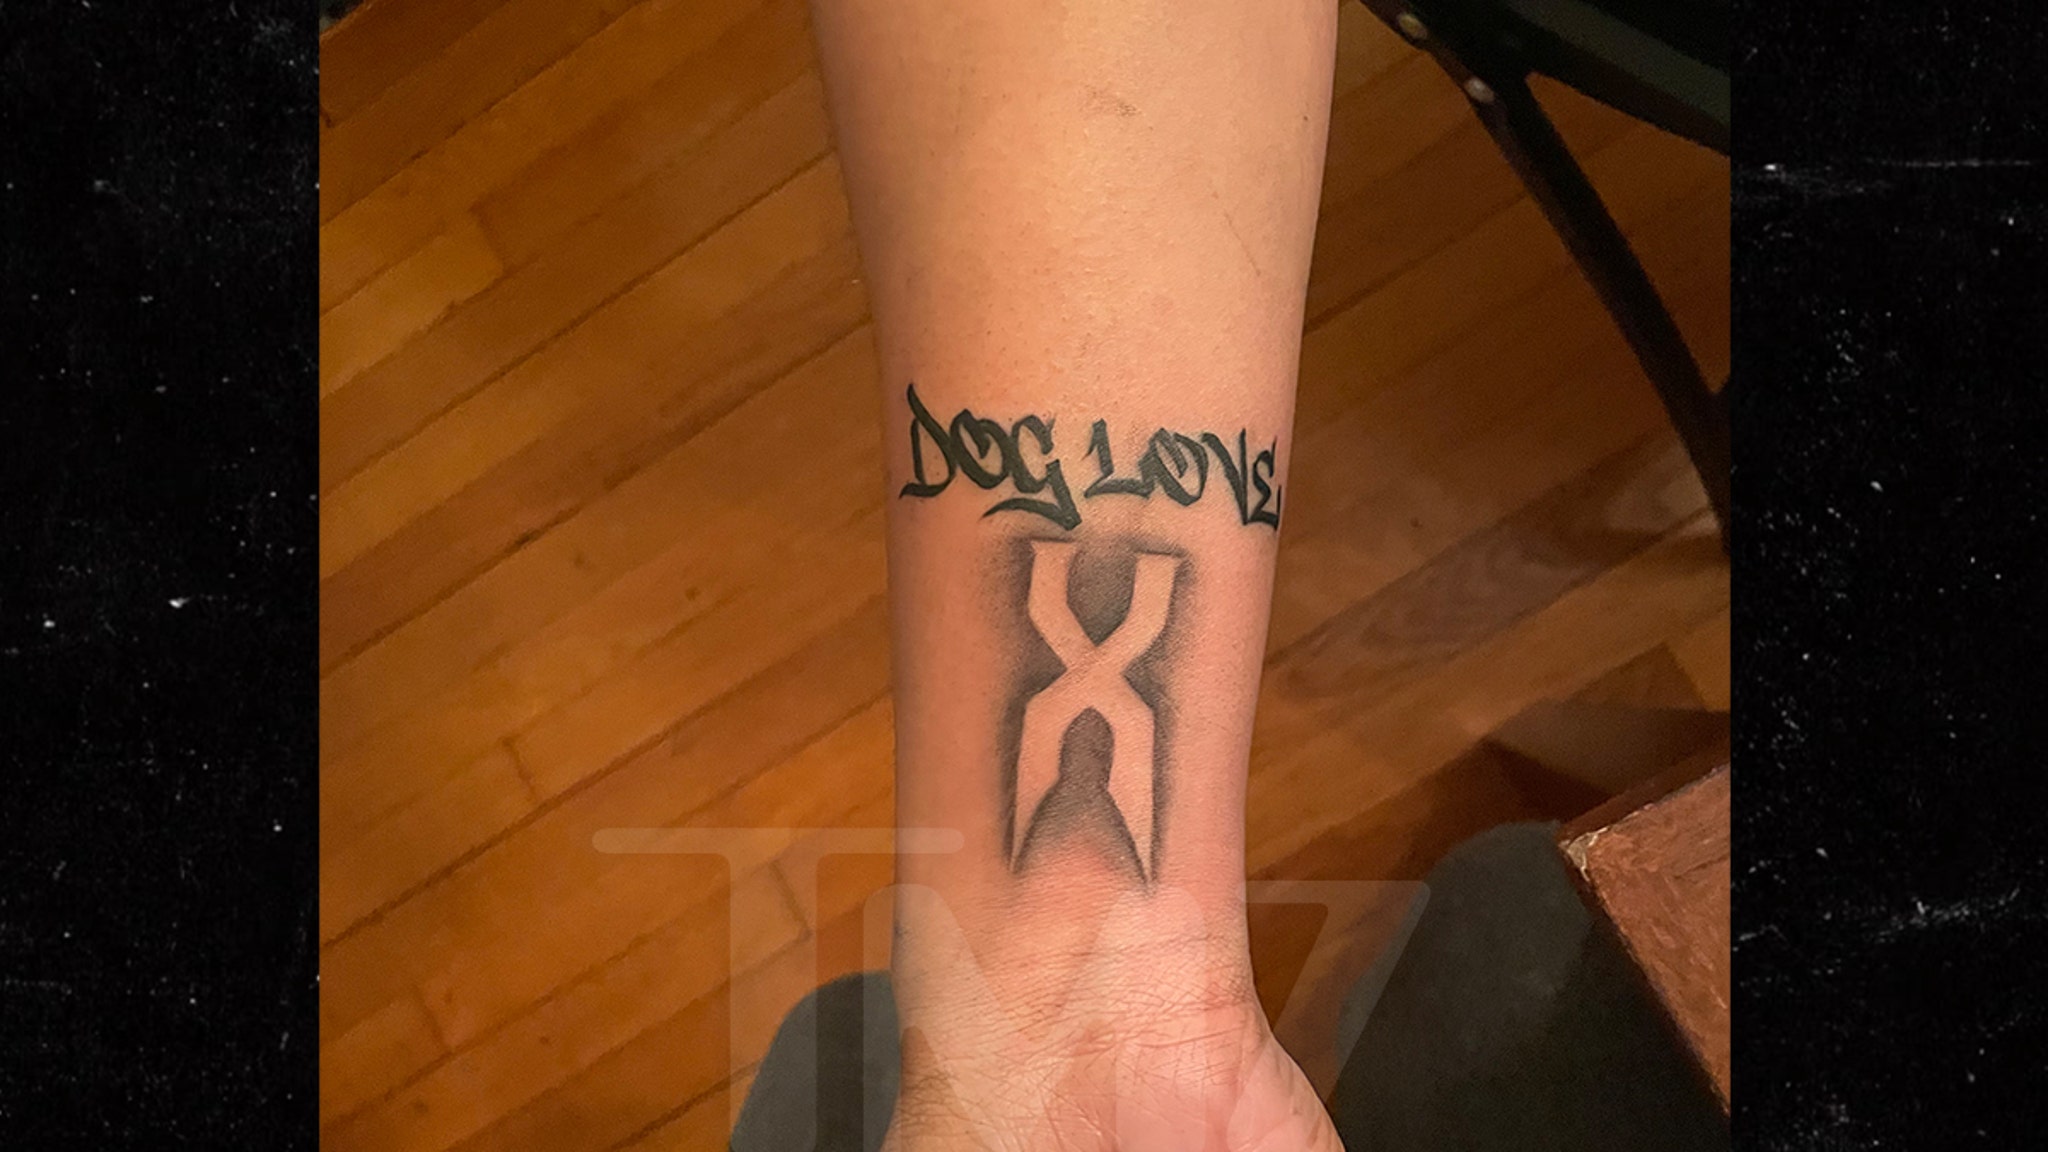 DMX’s fiancé gets ‘Dog Love’ tattoo to commemorate his death